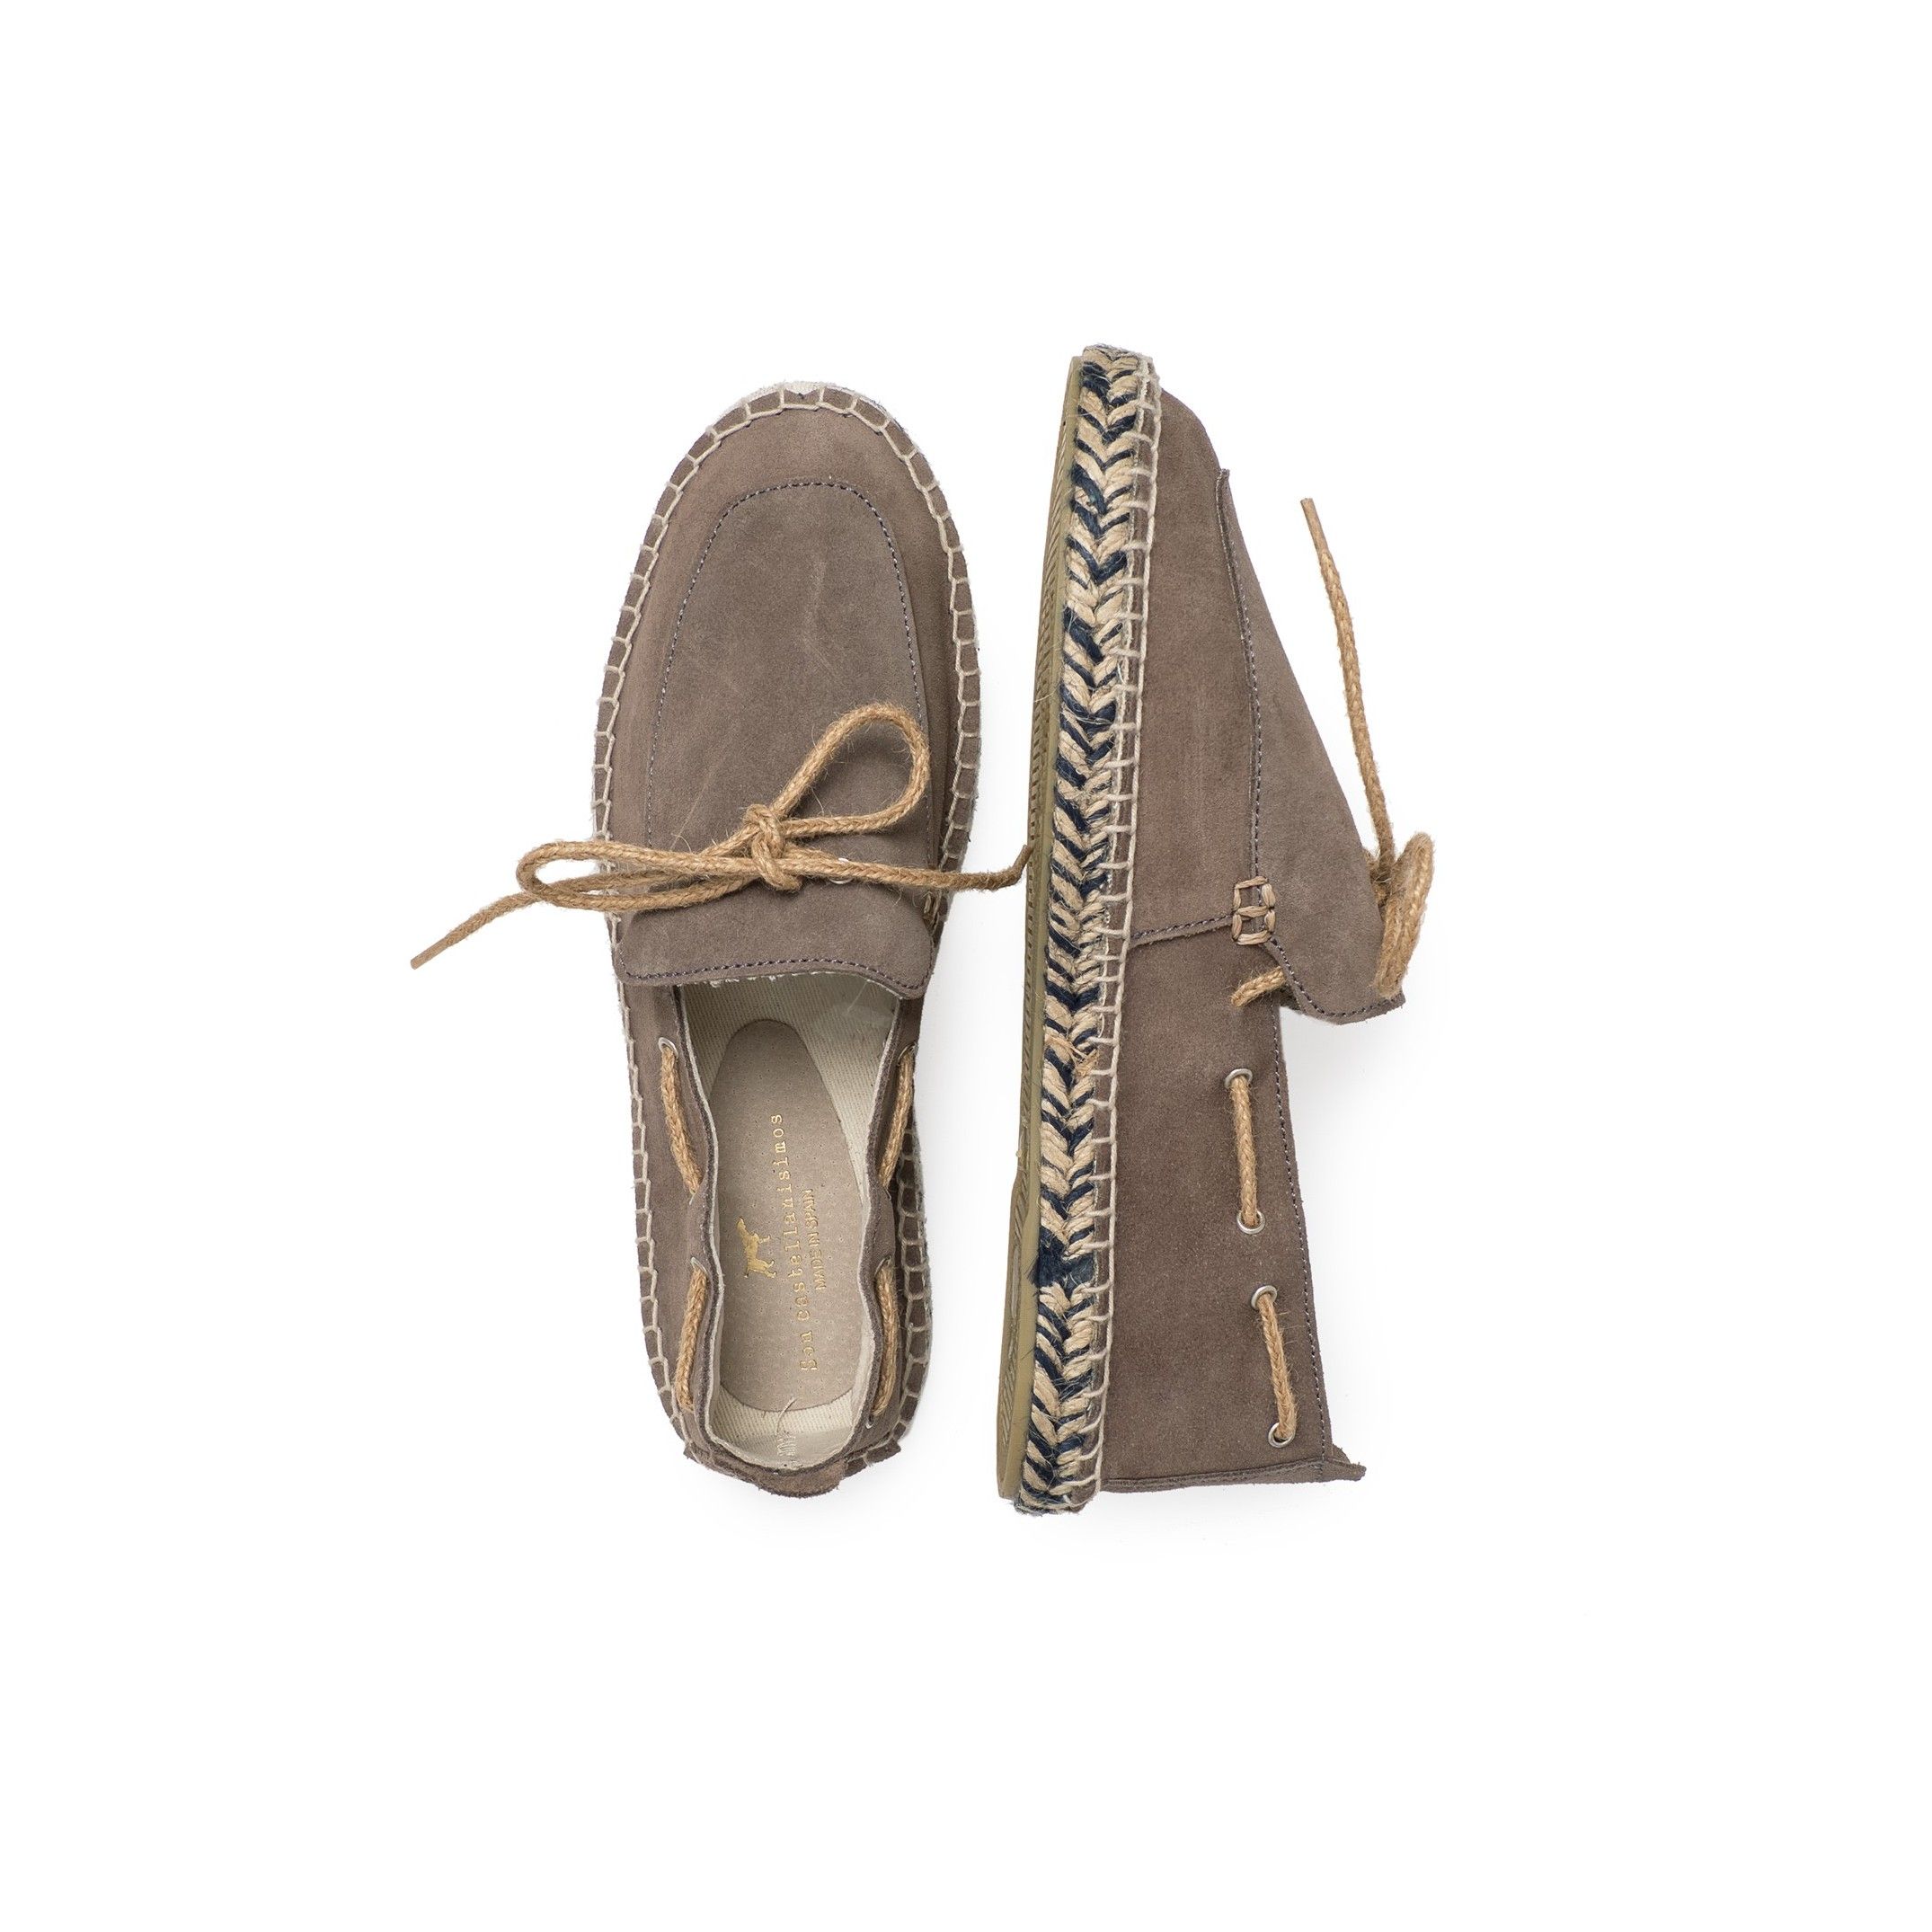 Flat espadrilles with bow, by Son Castellanisimos. Upper made of cowhide leather. Inner made of cowhide leather. Closure: laces. Inner lining and insole: cowhide leather and textile. Sole material: synthetic and non-slip. Heel height: 1,5 cm. Designed and manufactured in Spain.